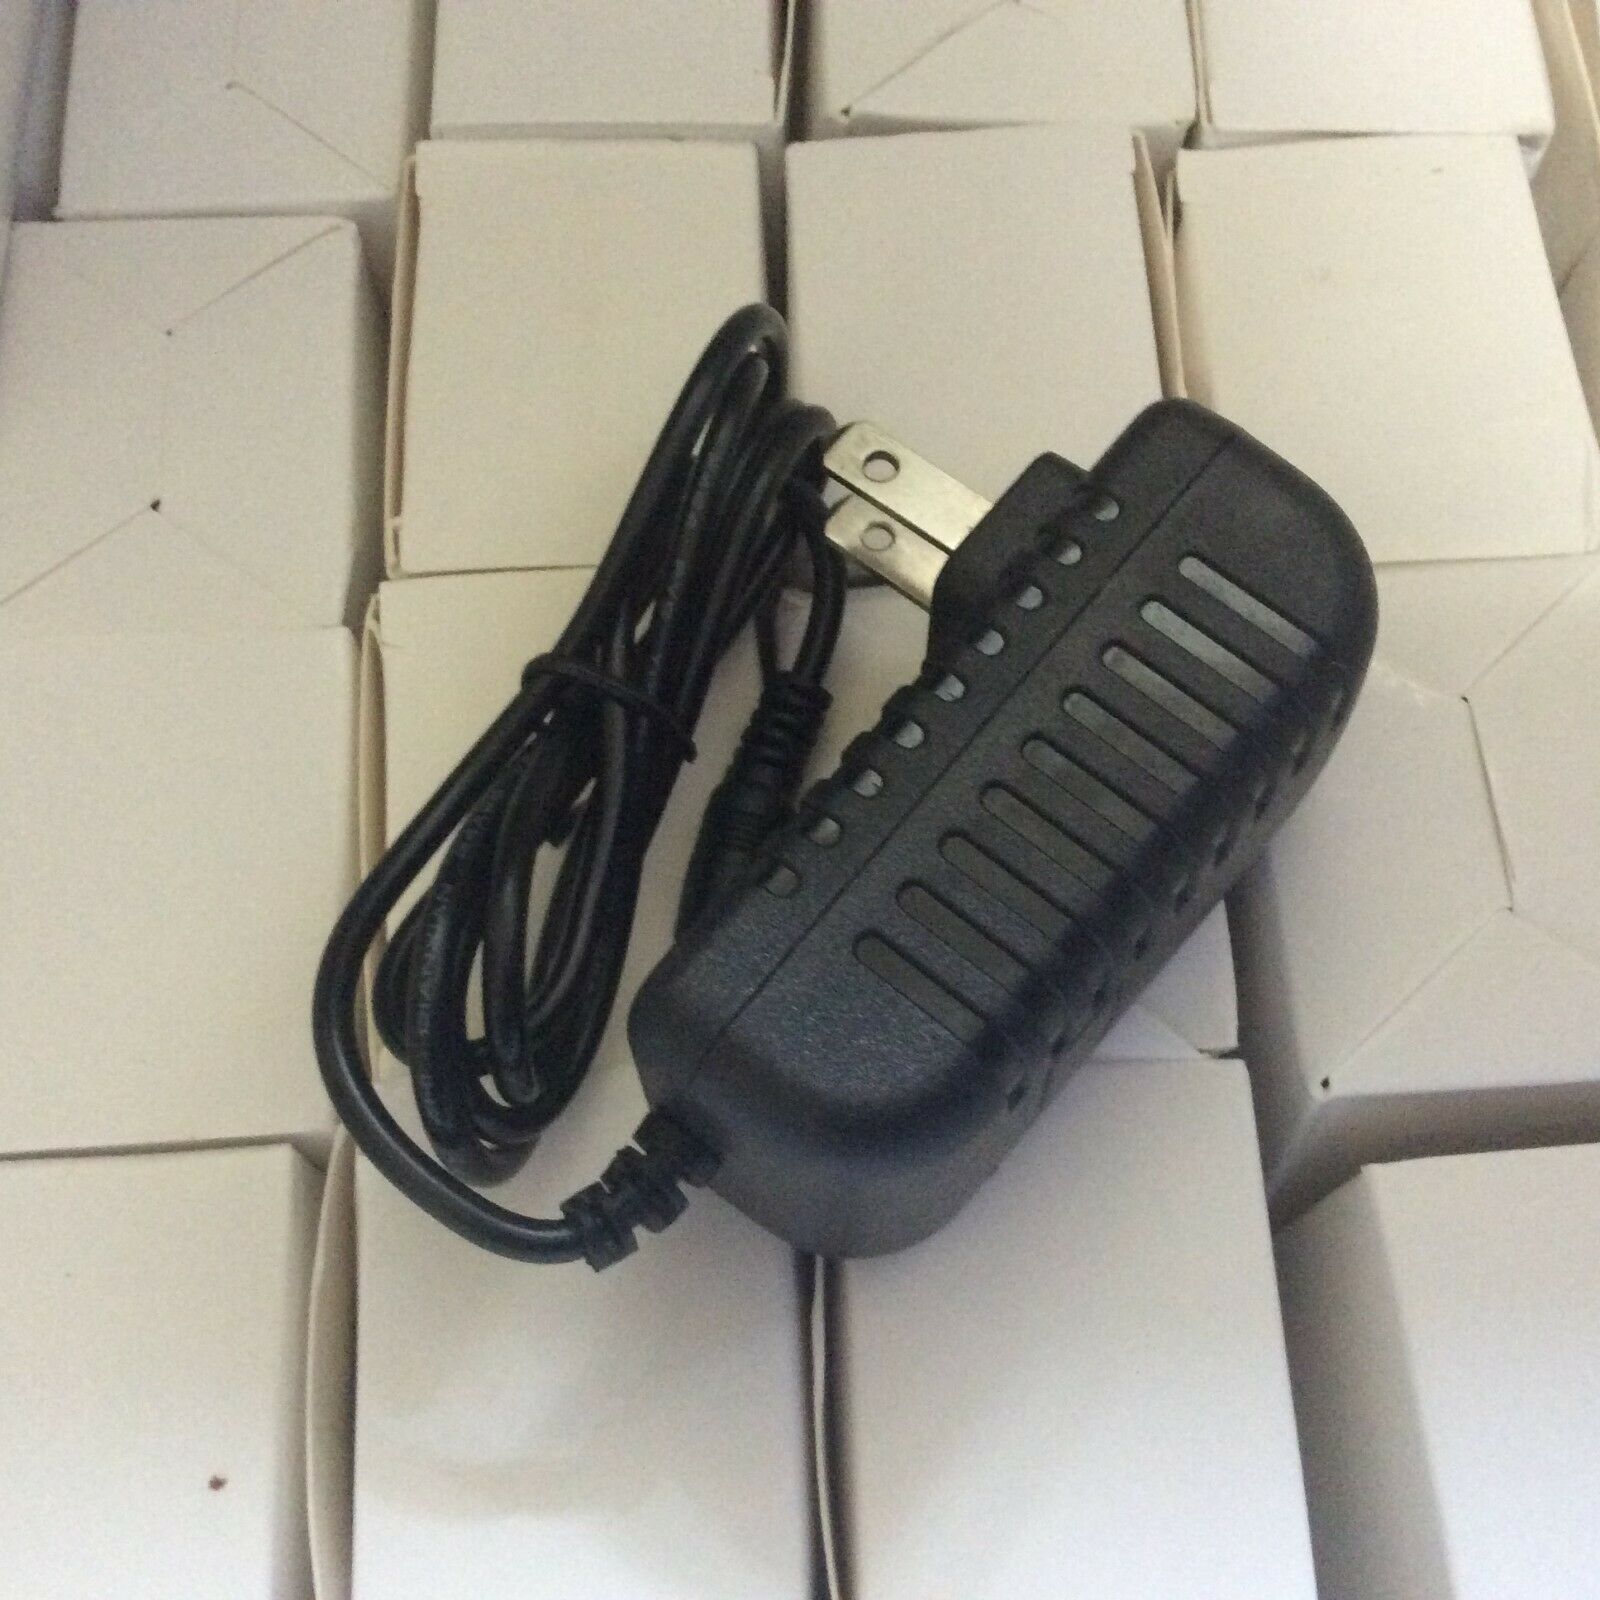 *Brand NEW* Boss PSA-120S 120T Archer Cat. No. 273-1656 9V AC DC Power Adapter Charger